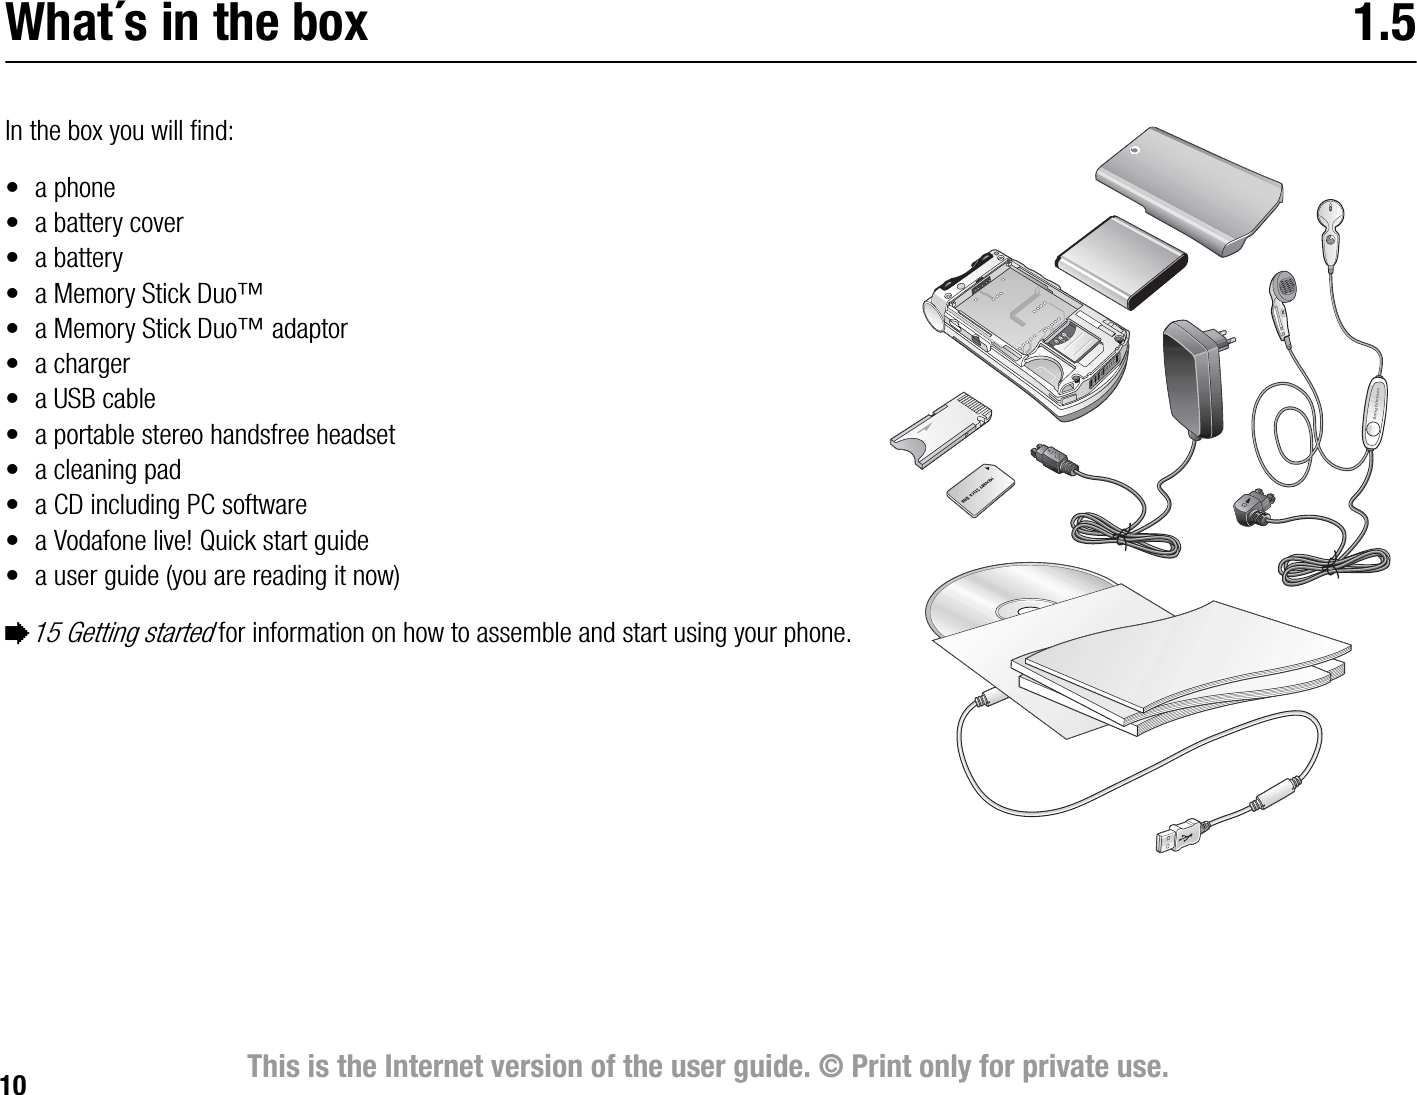 10 This is the Internet version of the user guide. © Print only for private use.What´s in the box 1.5In the box you will find:• a phone• a battery cover• a battery• a Memory Stick Duo™• a Memory Stick Duo™ adaptor•a charger•a USB cable• a portable stereo handsfree headset• a cleaning pad• a CD including PC software• a Vodafone live! Quick start guide• a user guide (you are reading it now)%15 Getting started for information on how to assemble and start using your phone.